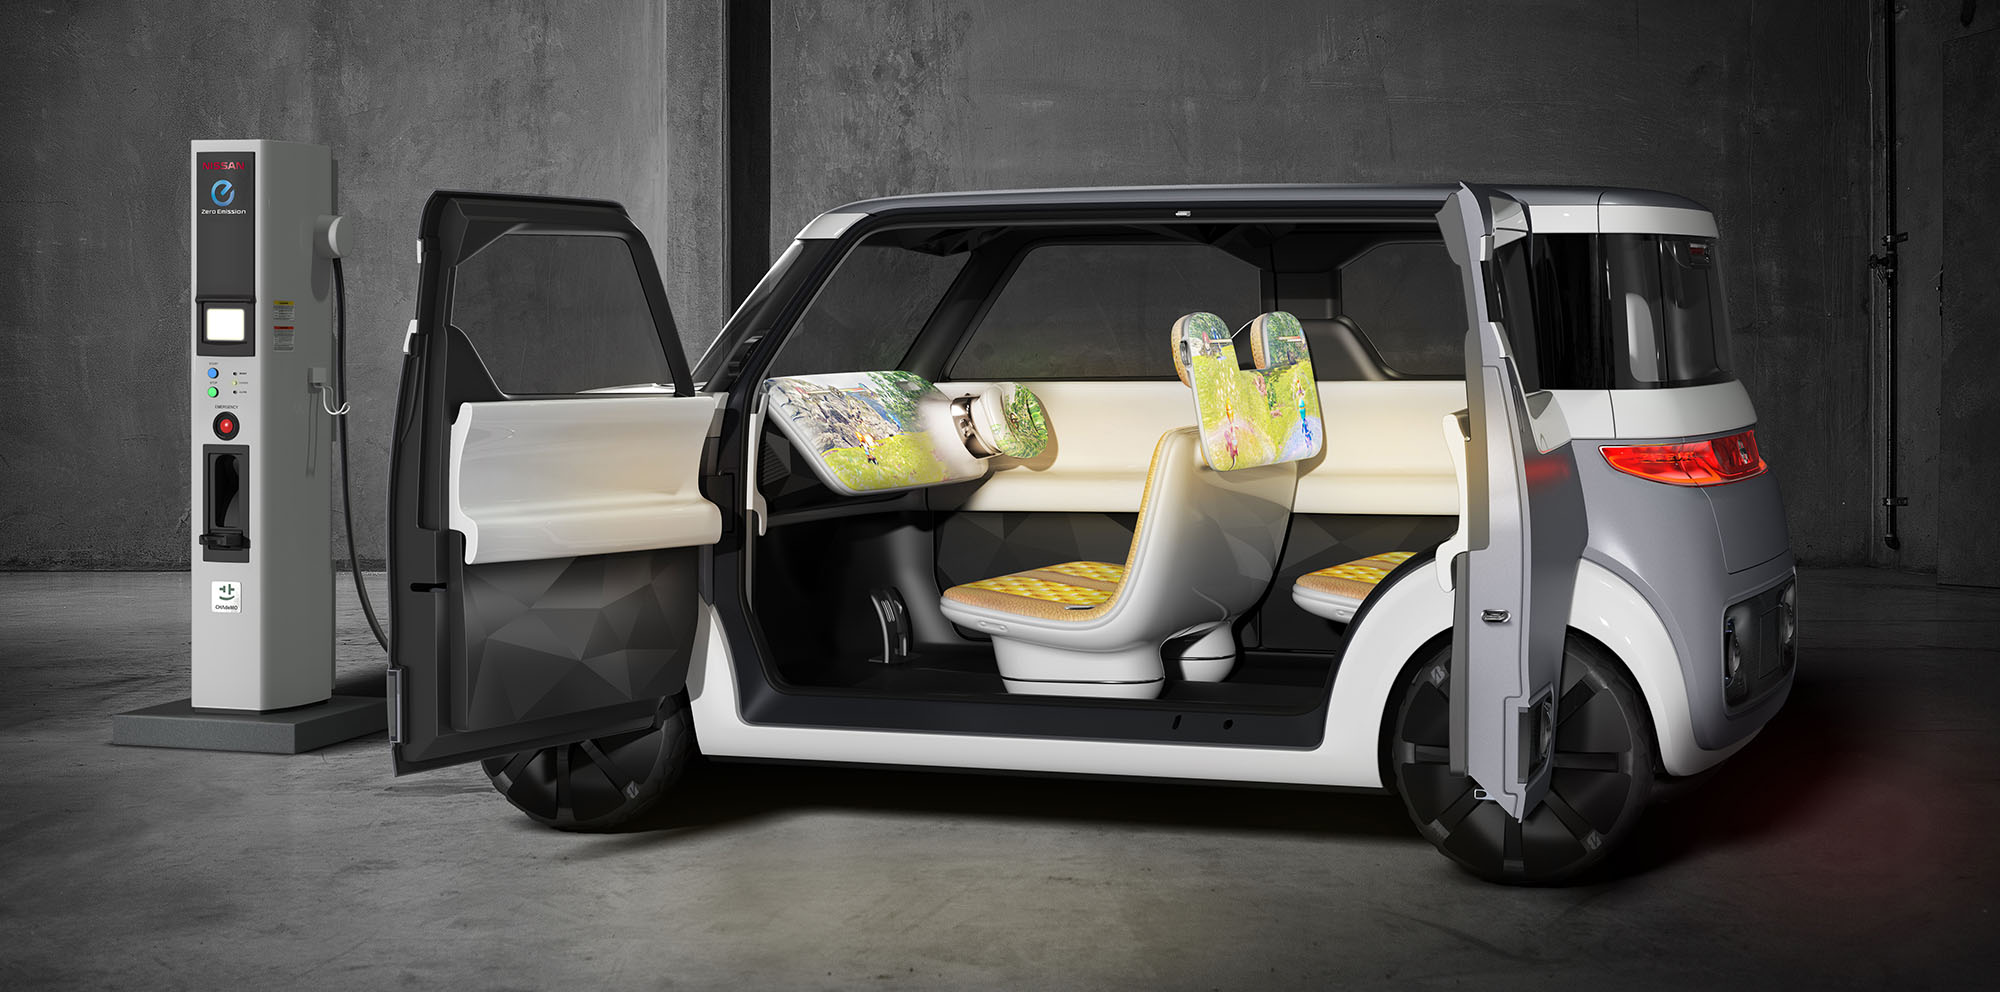 Nissan Teatro for Dayz concept unveiled - Photos (1 of 8)